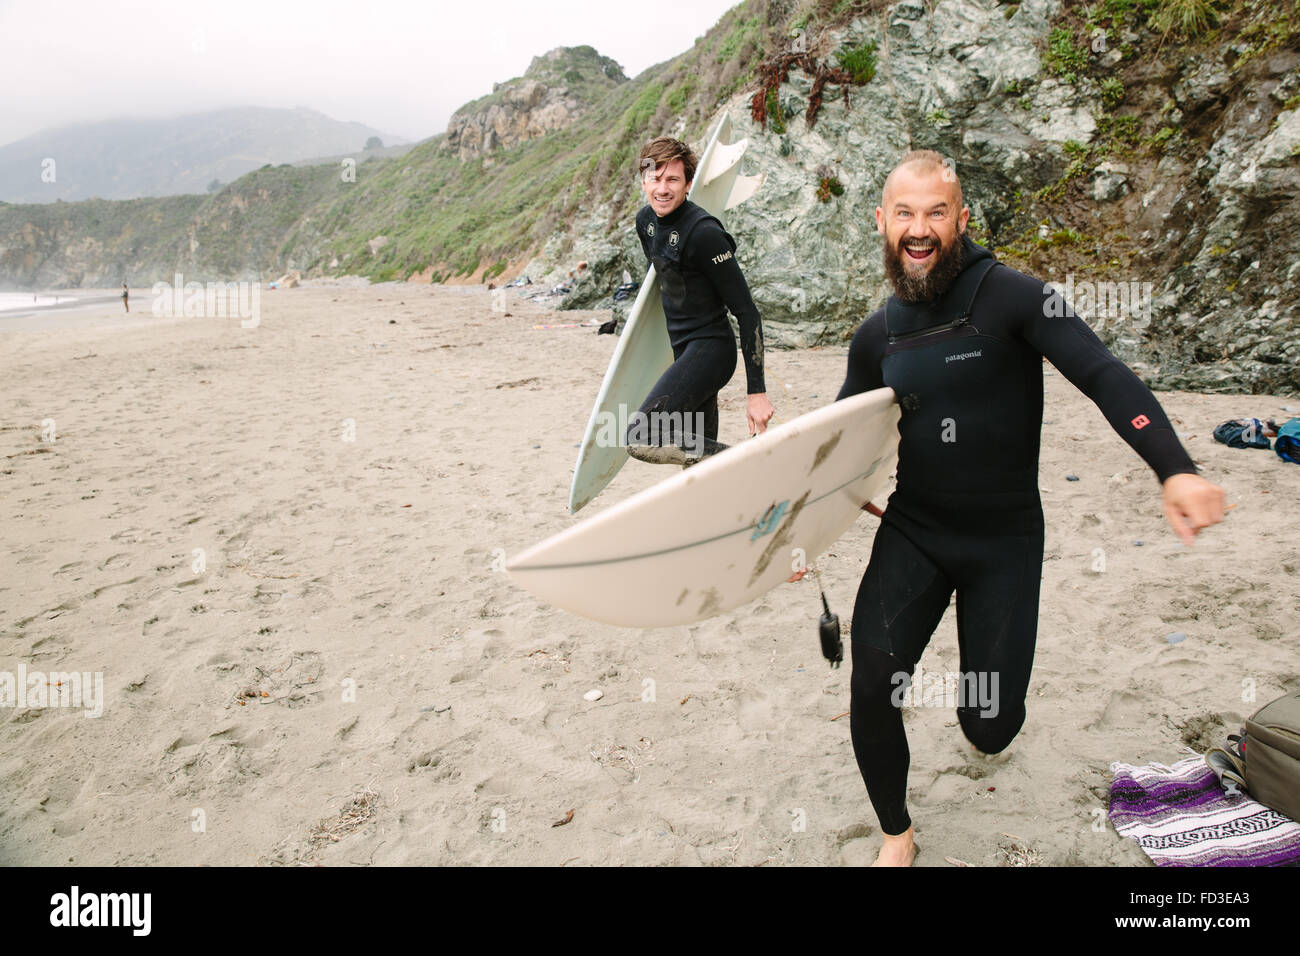 Two surfers goof around on the beach before jumping in the water to catch waves in Big Sur, California. Stock Photo